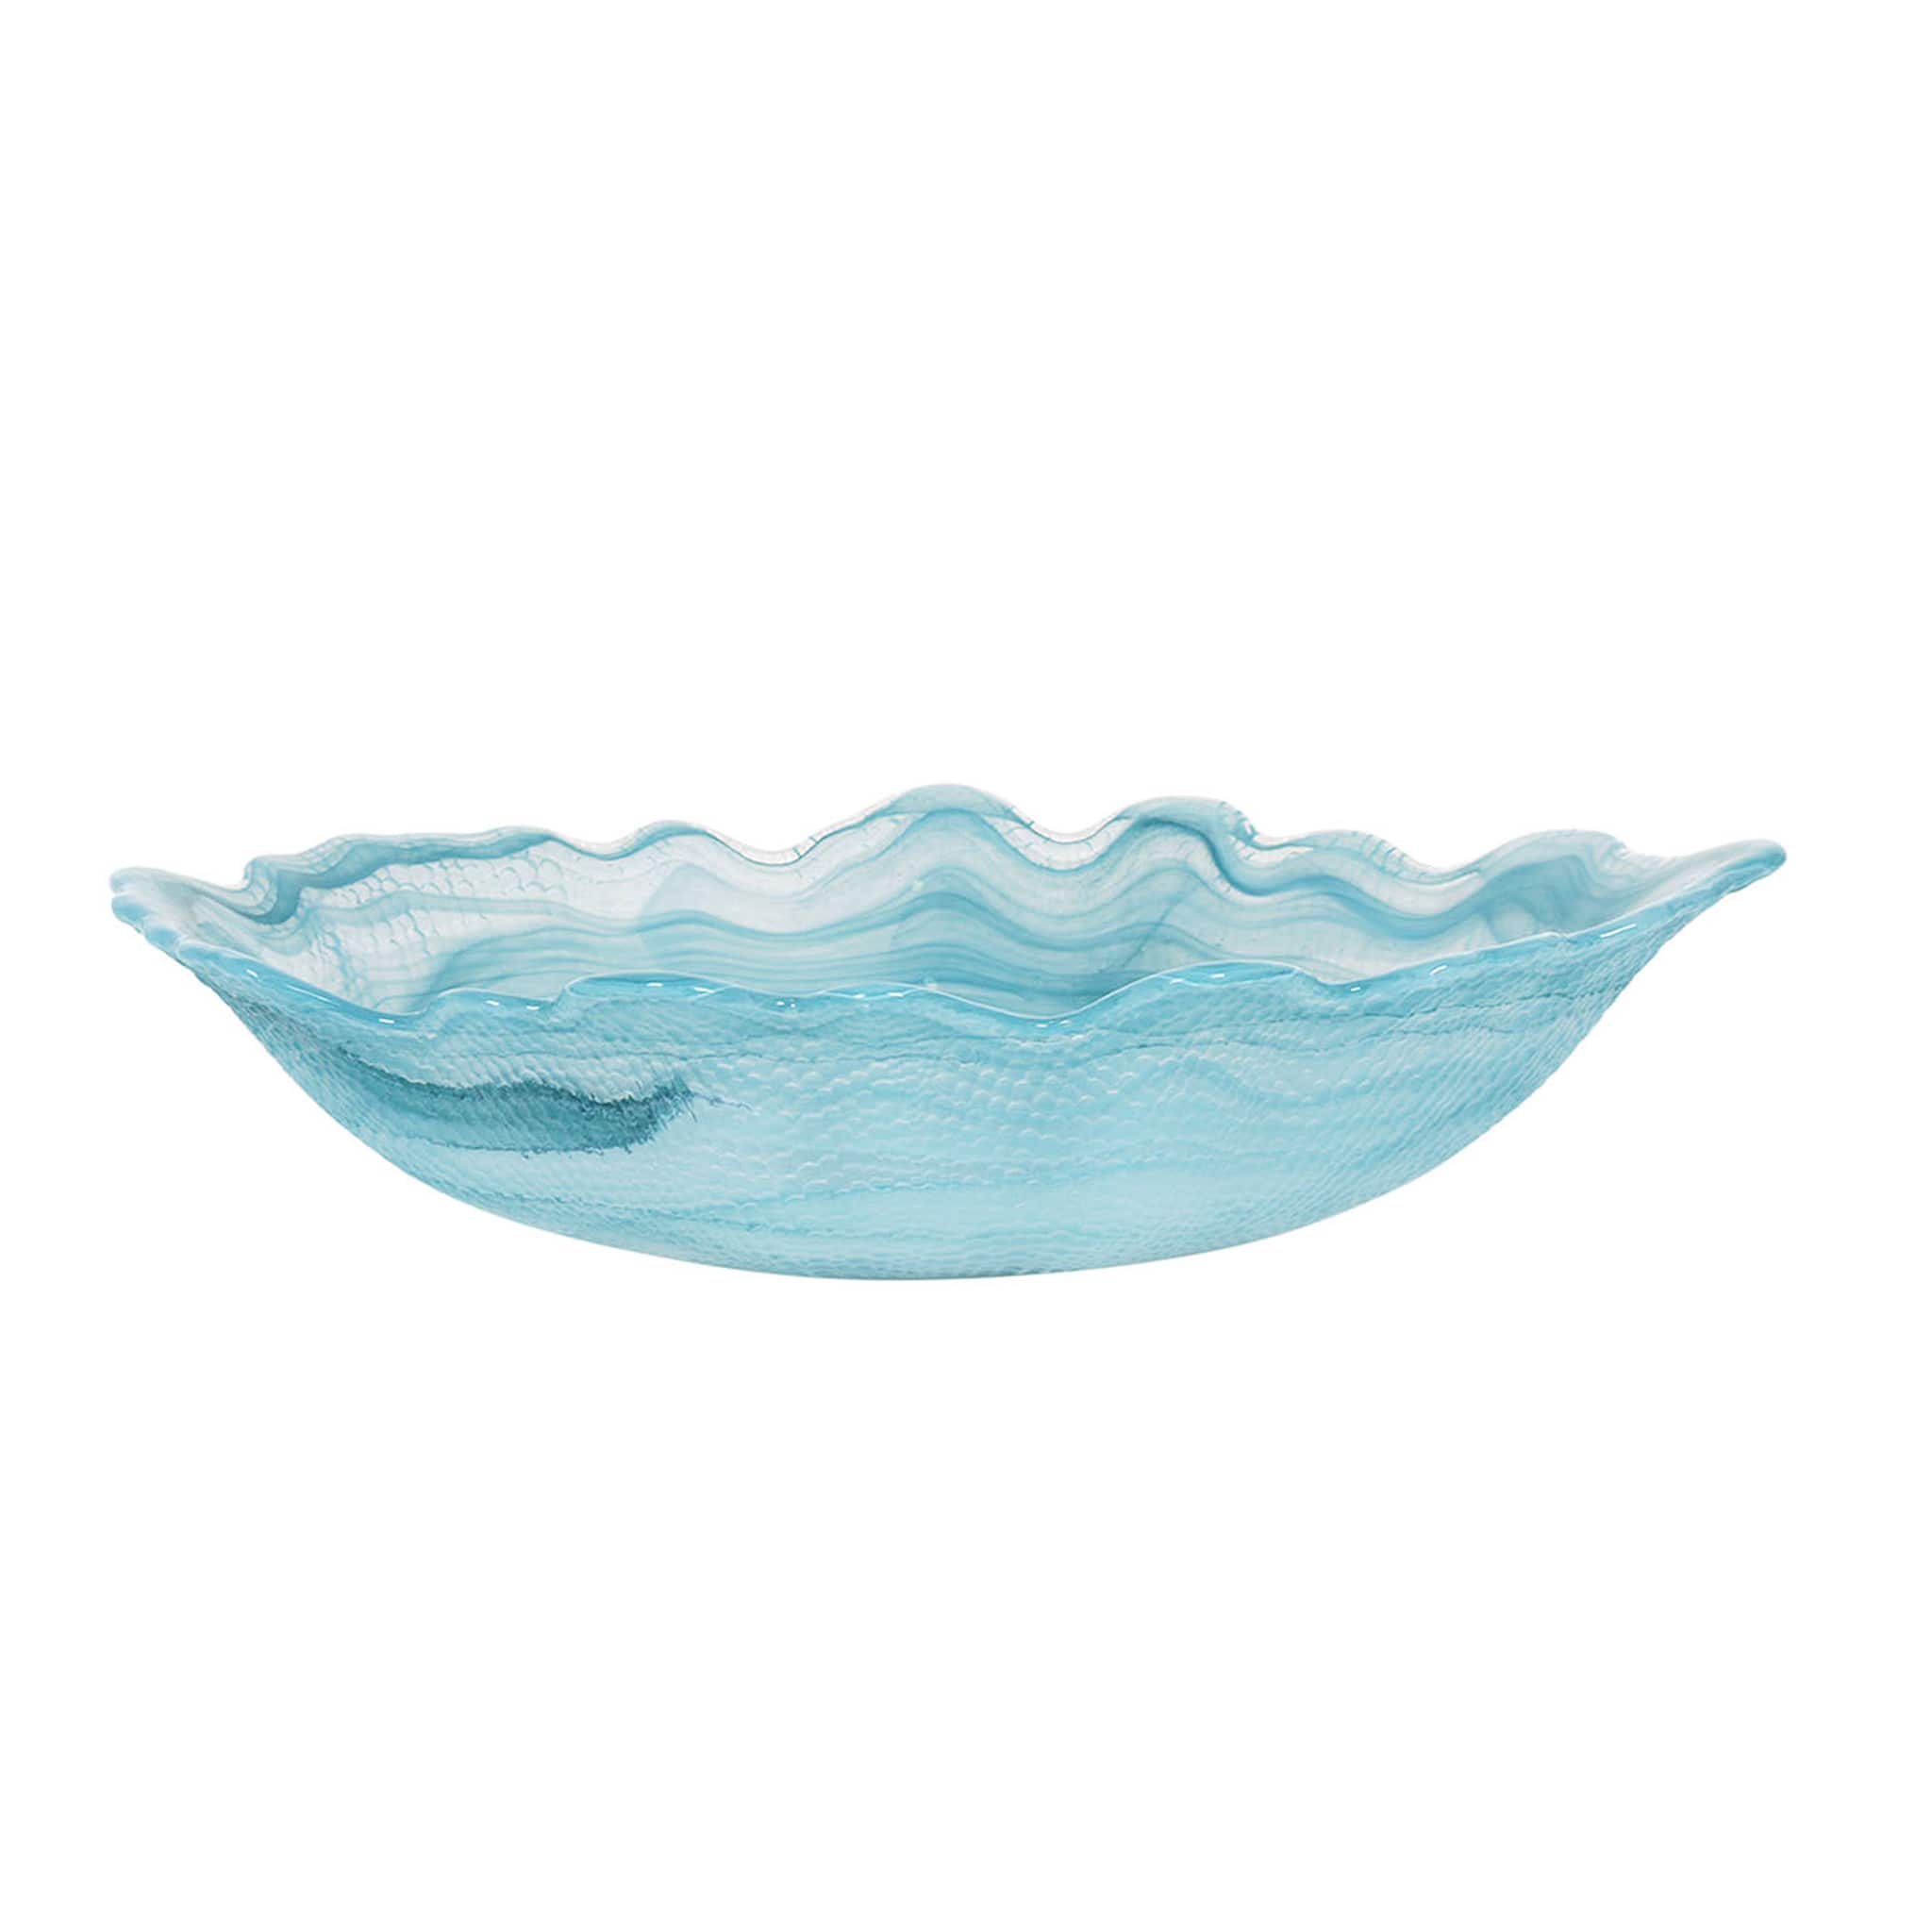 Turquoise Marble Glass Serving Bowl, 30x23cm